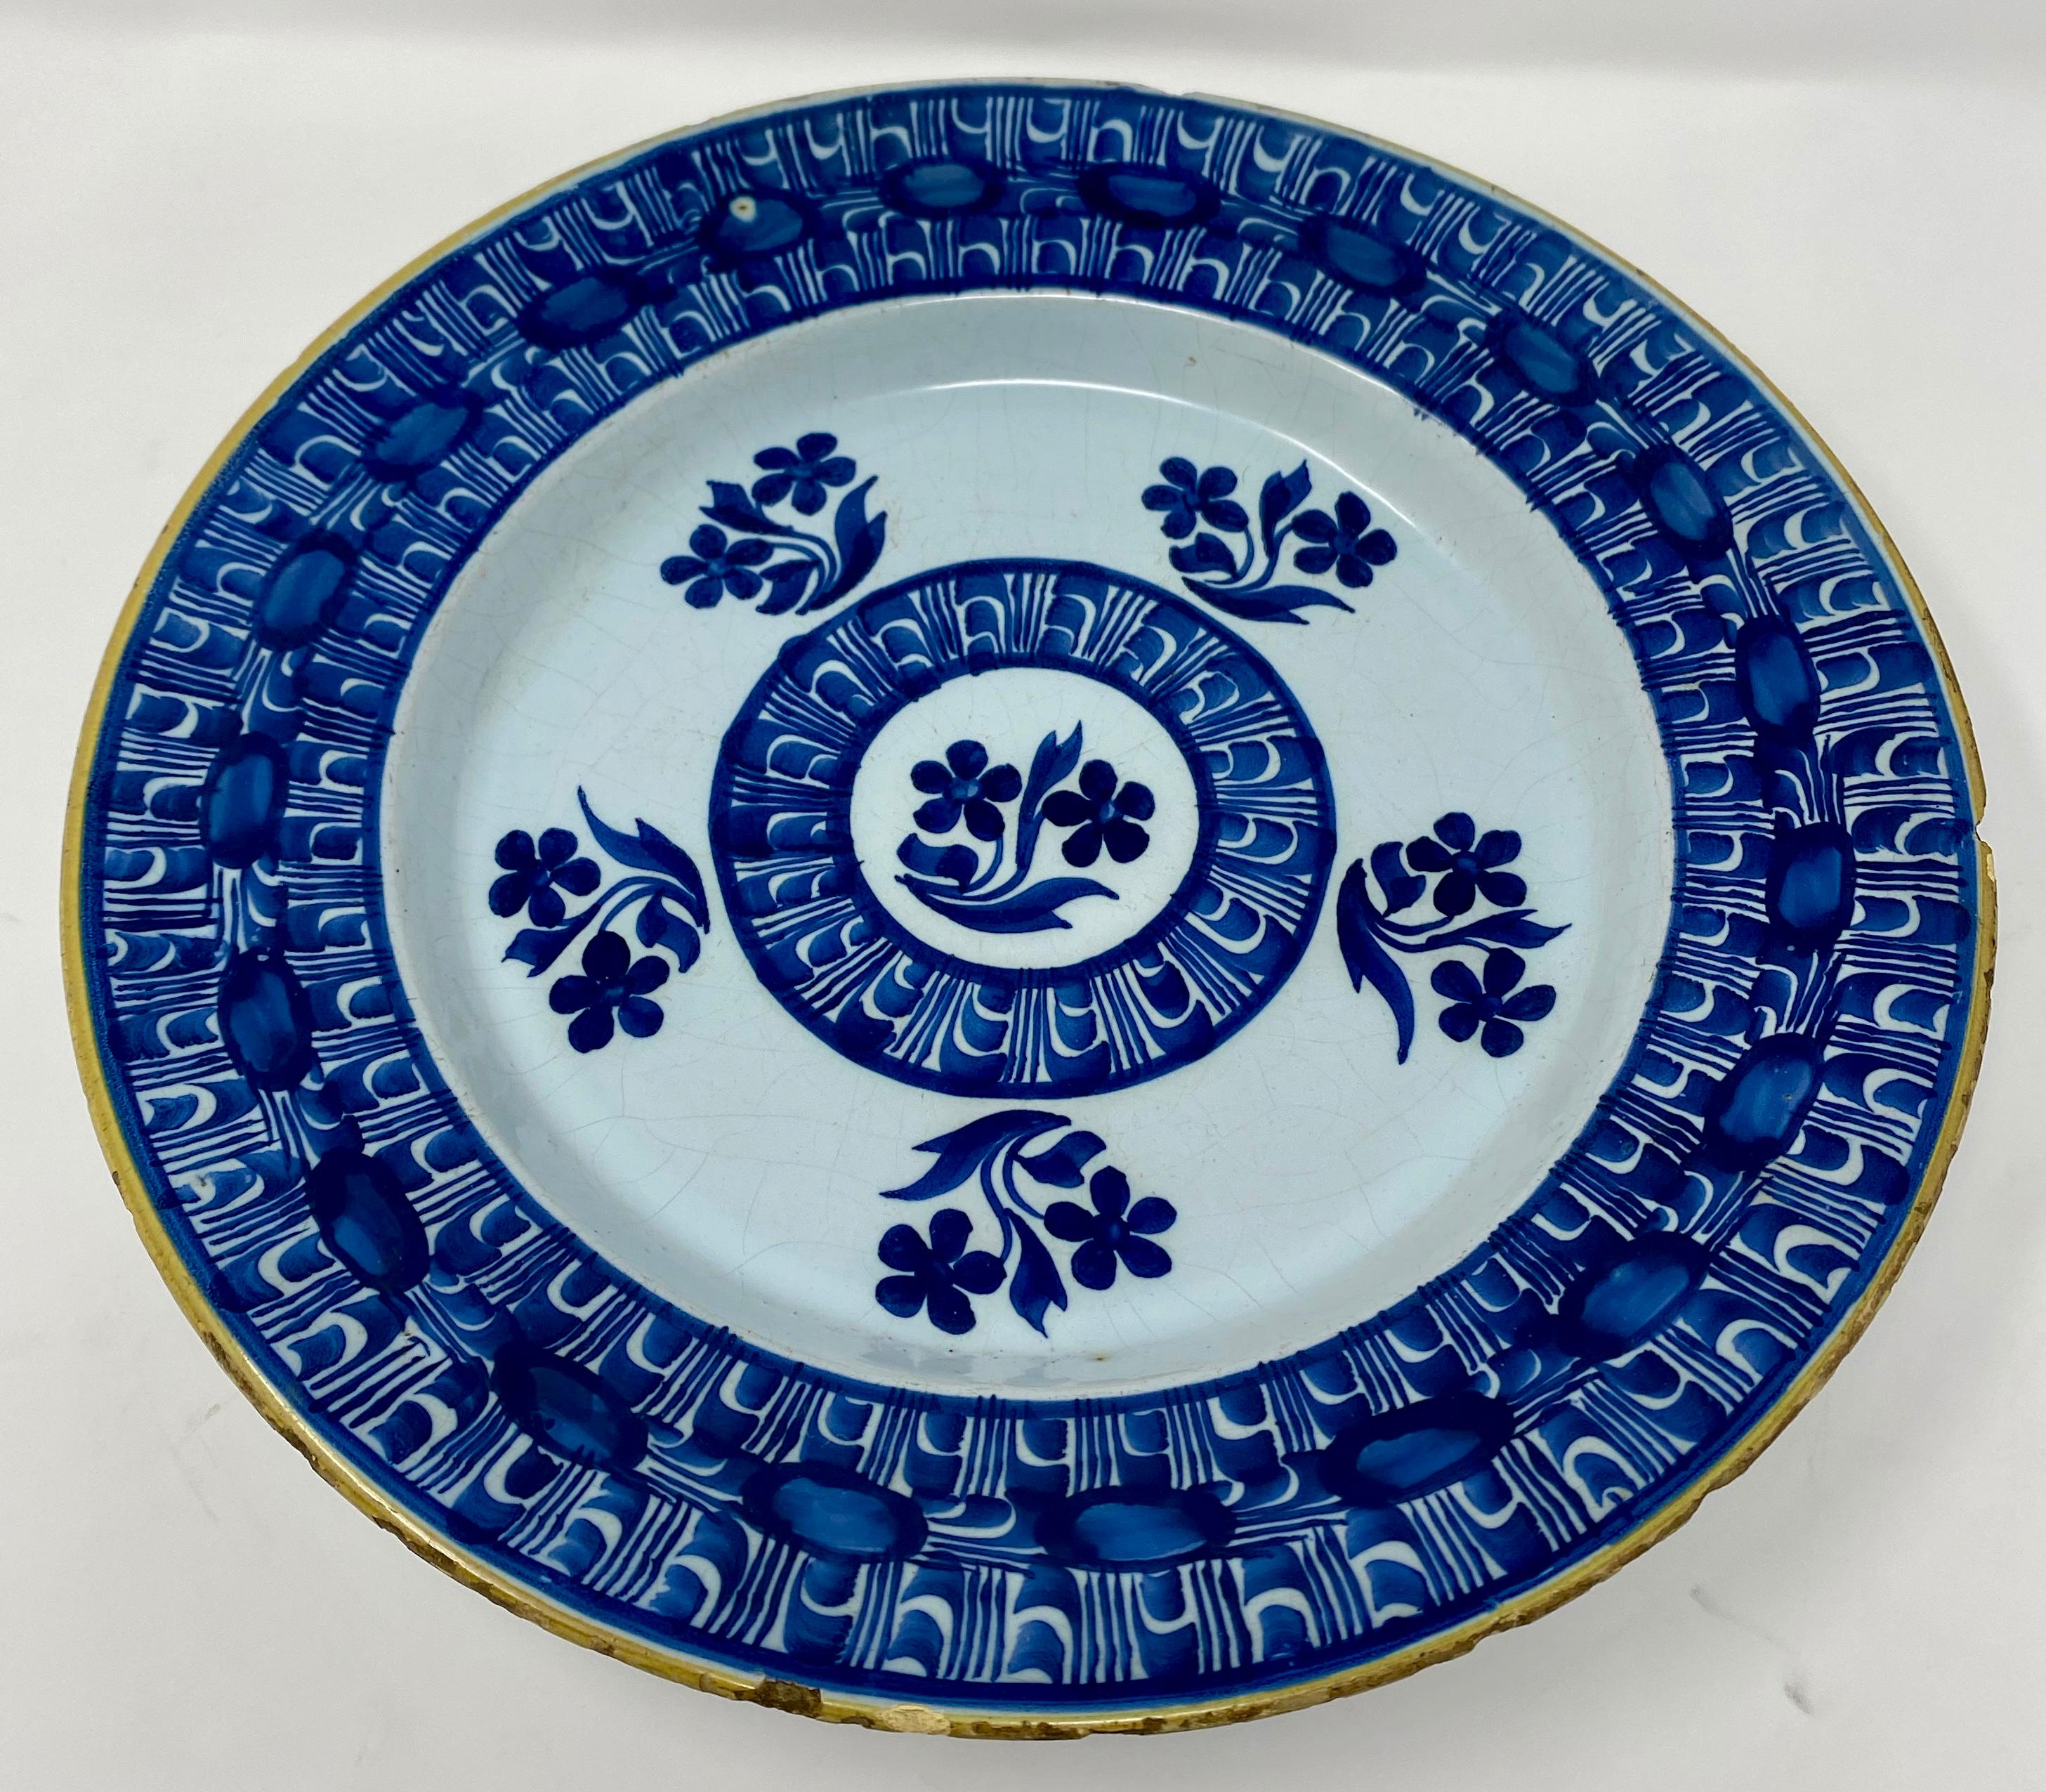 Antique 18th Century Dutch Delft Porcelain Plate In Good Condition For Sale In New Orleans, LA